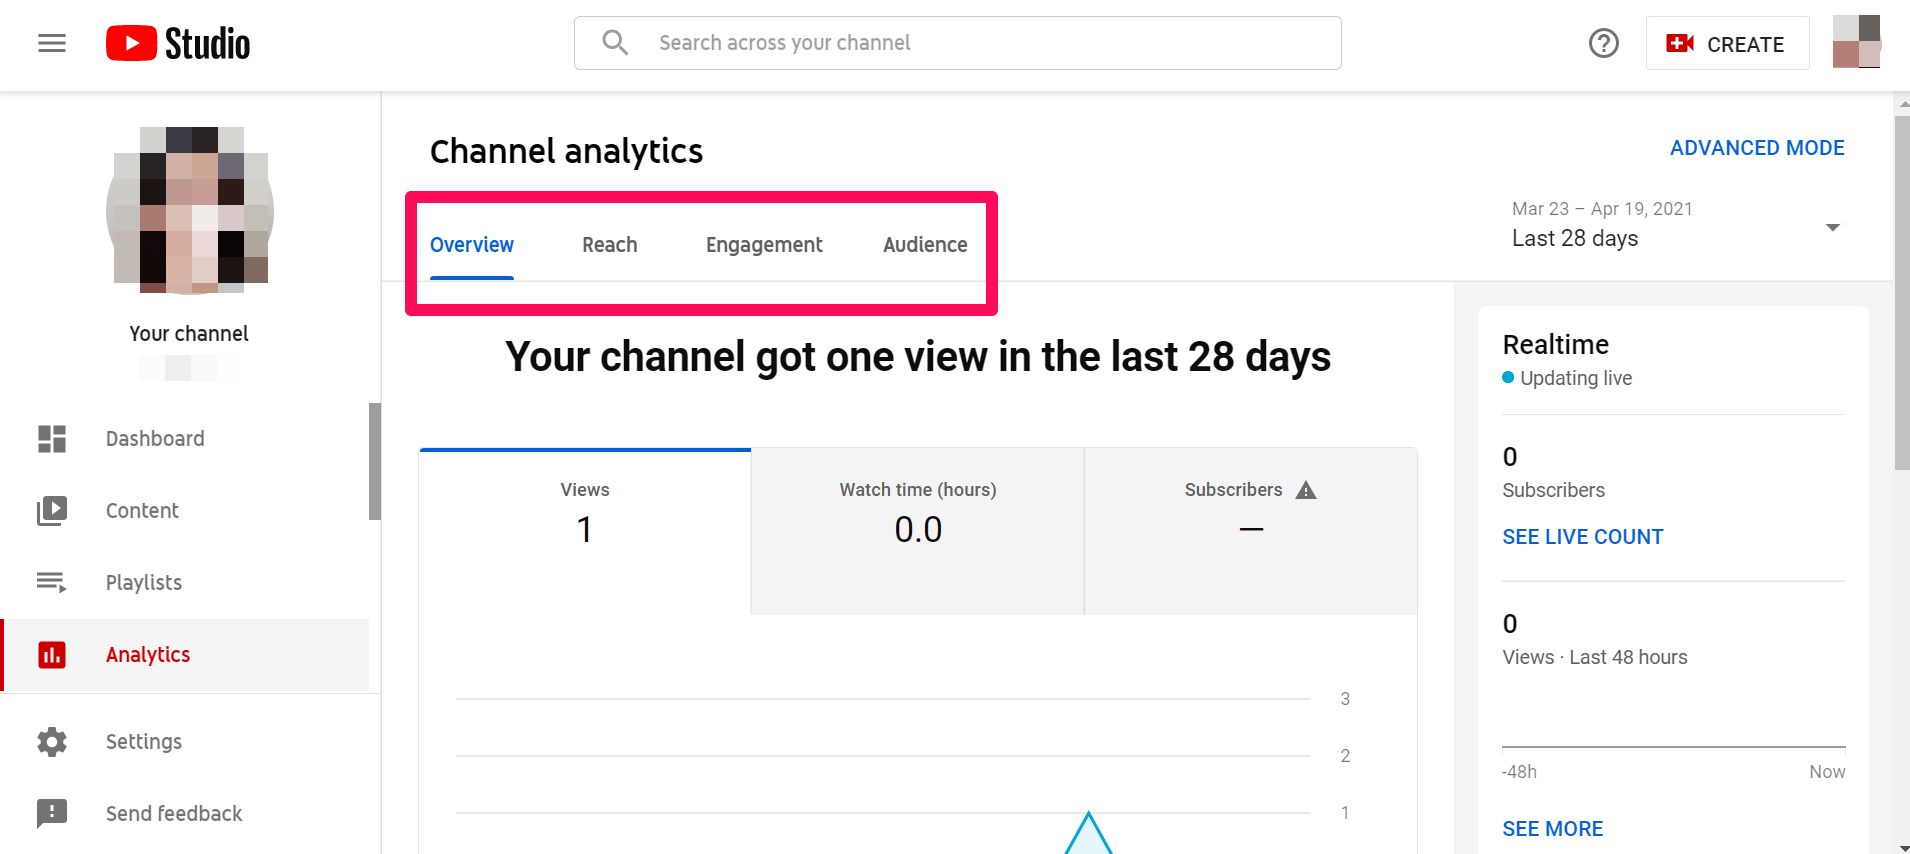 Adds Real-Time Subscriber Counts in Channel Dashboards